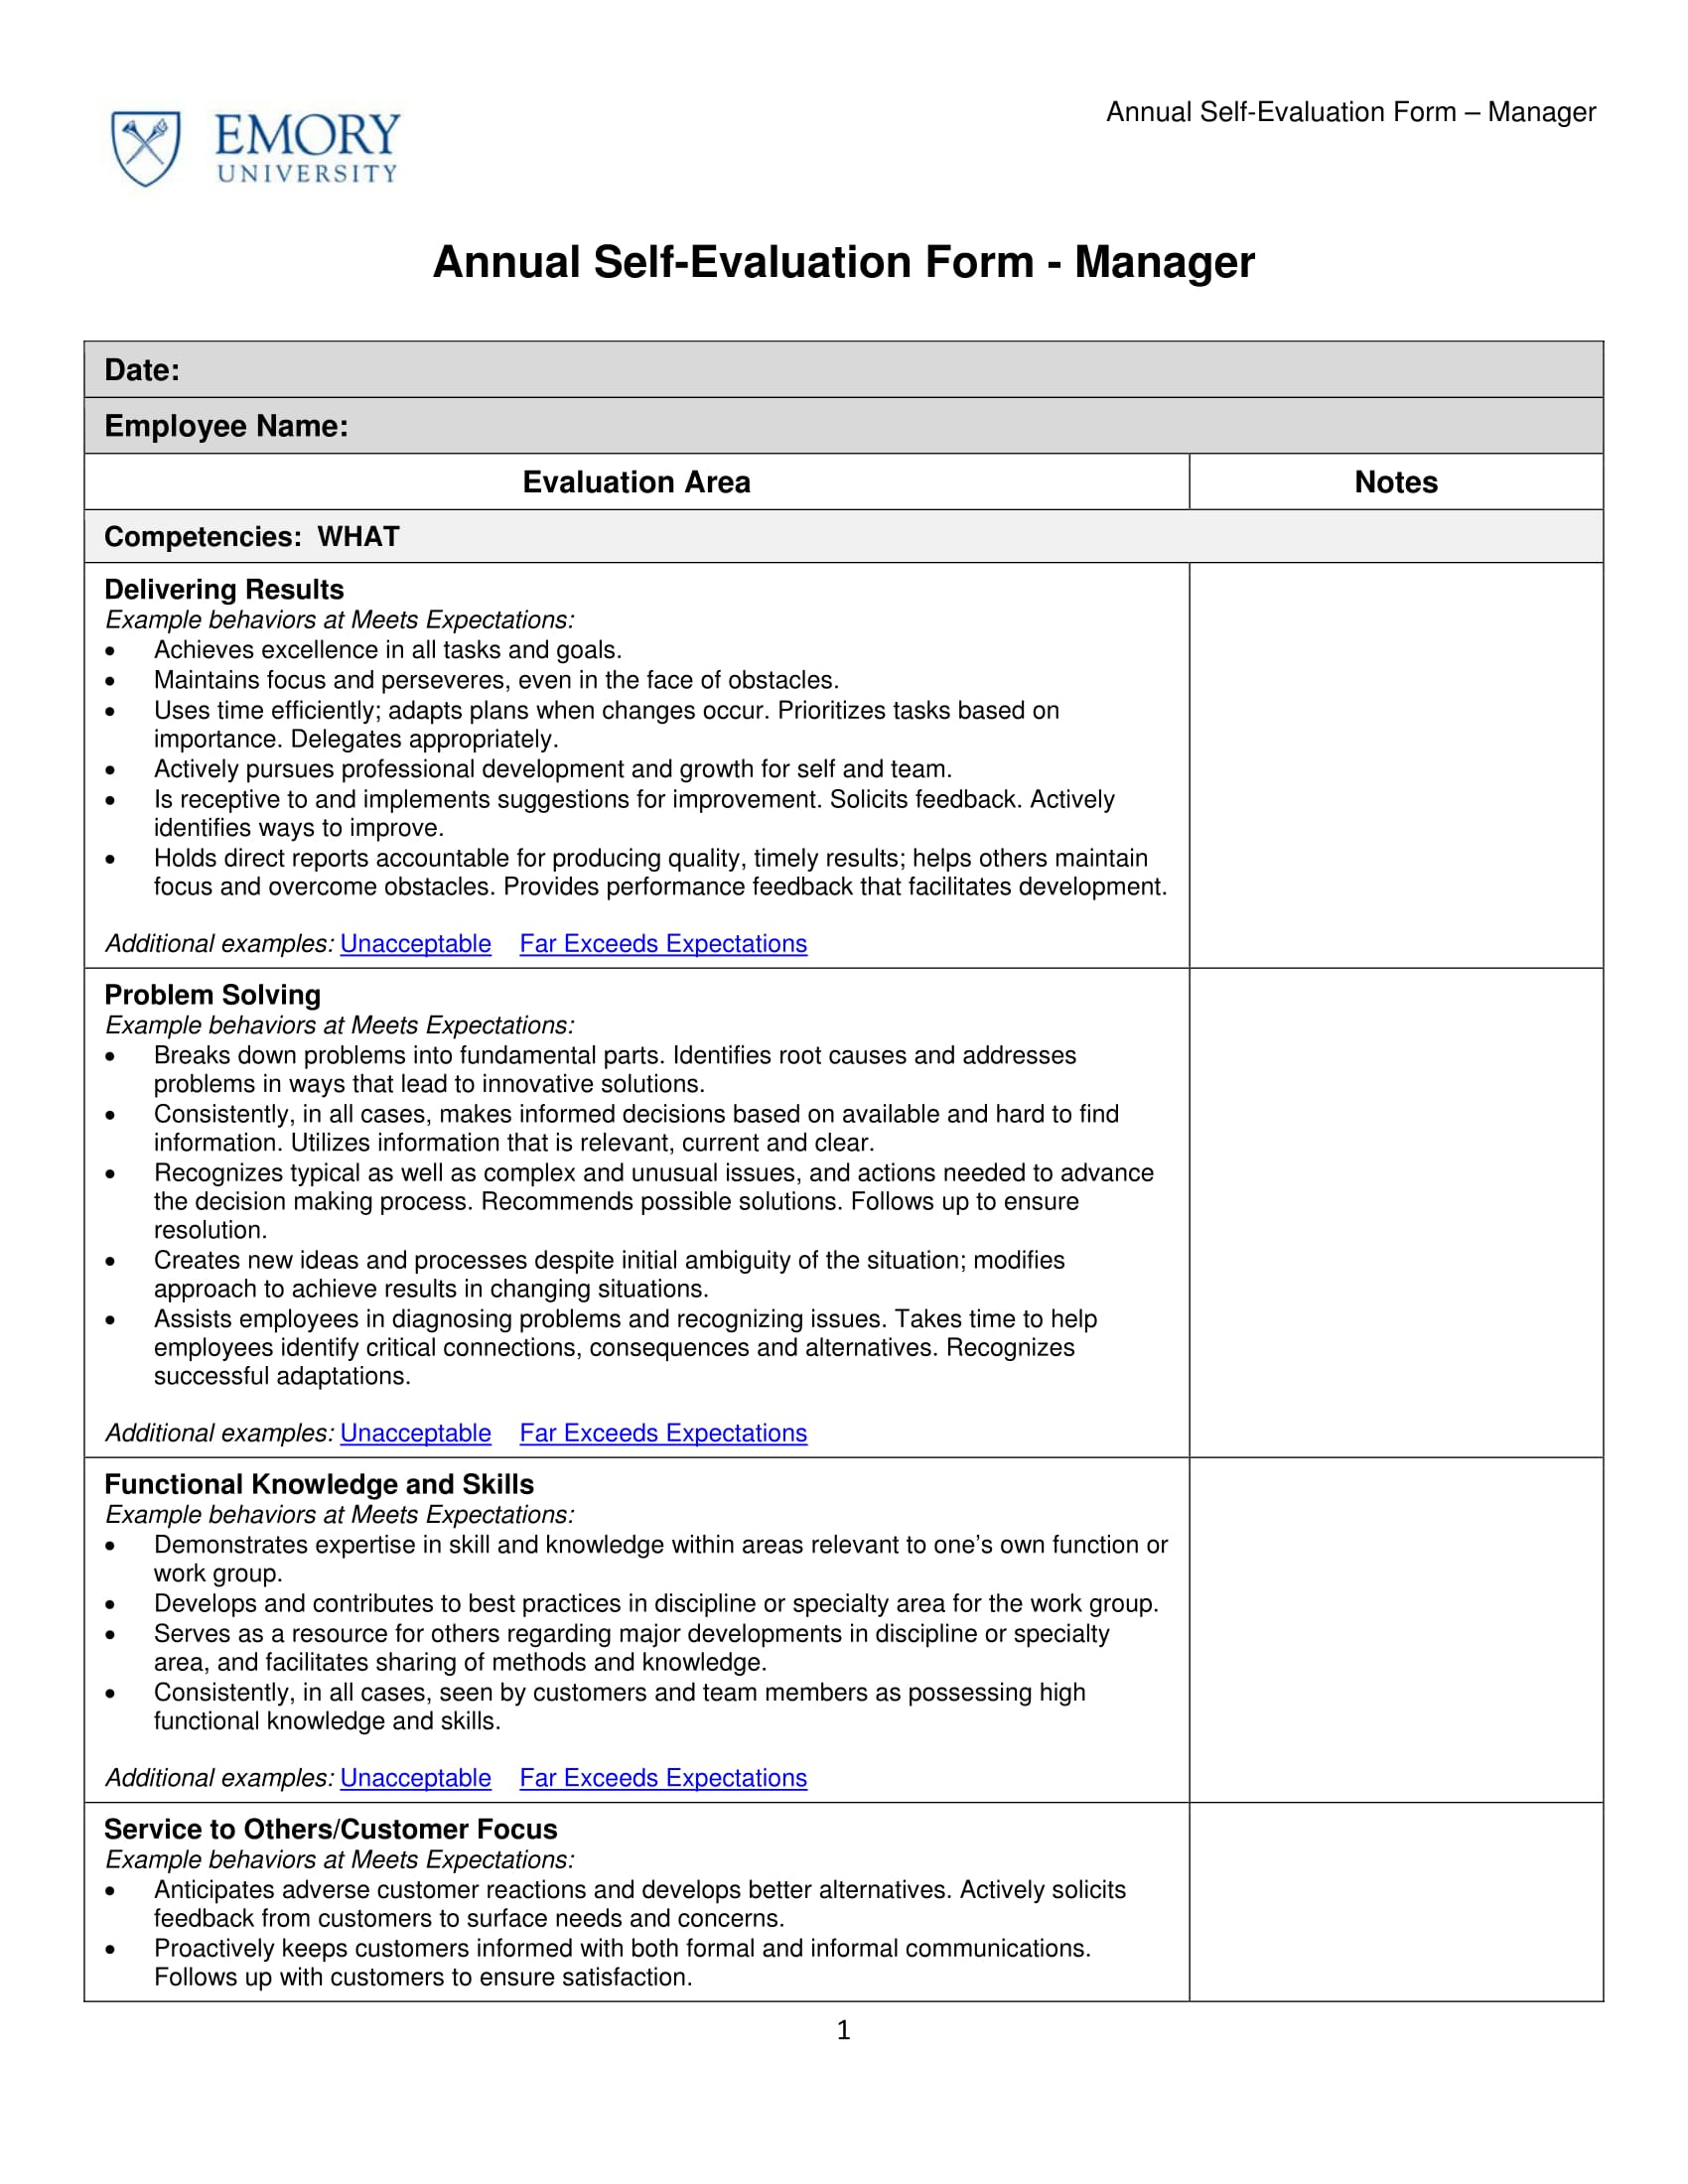 annual self evaluation form – manager 1